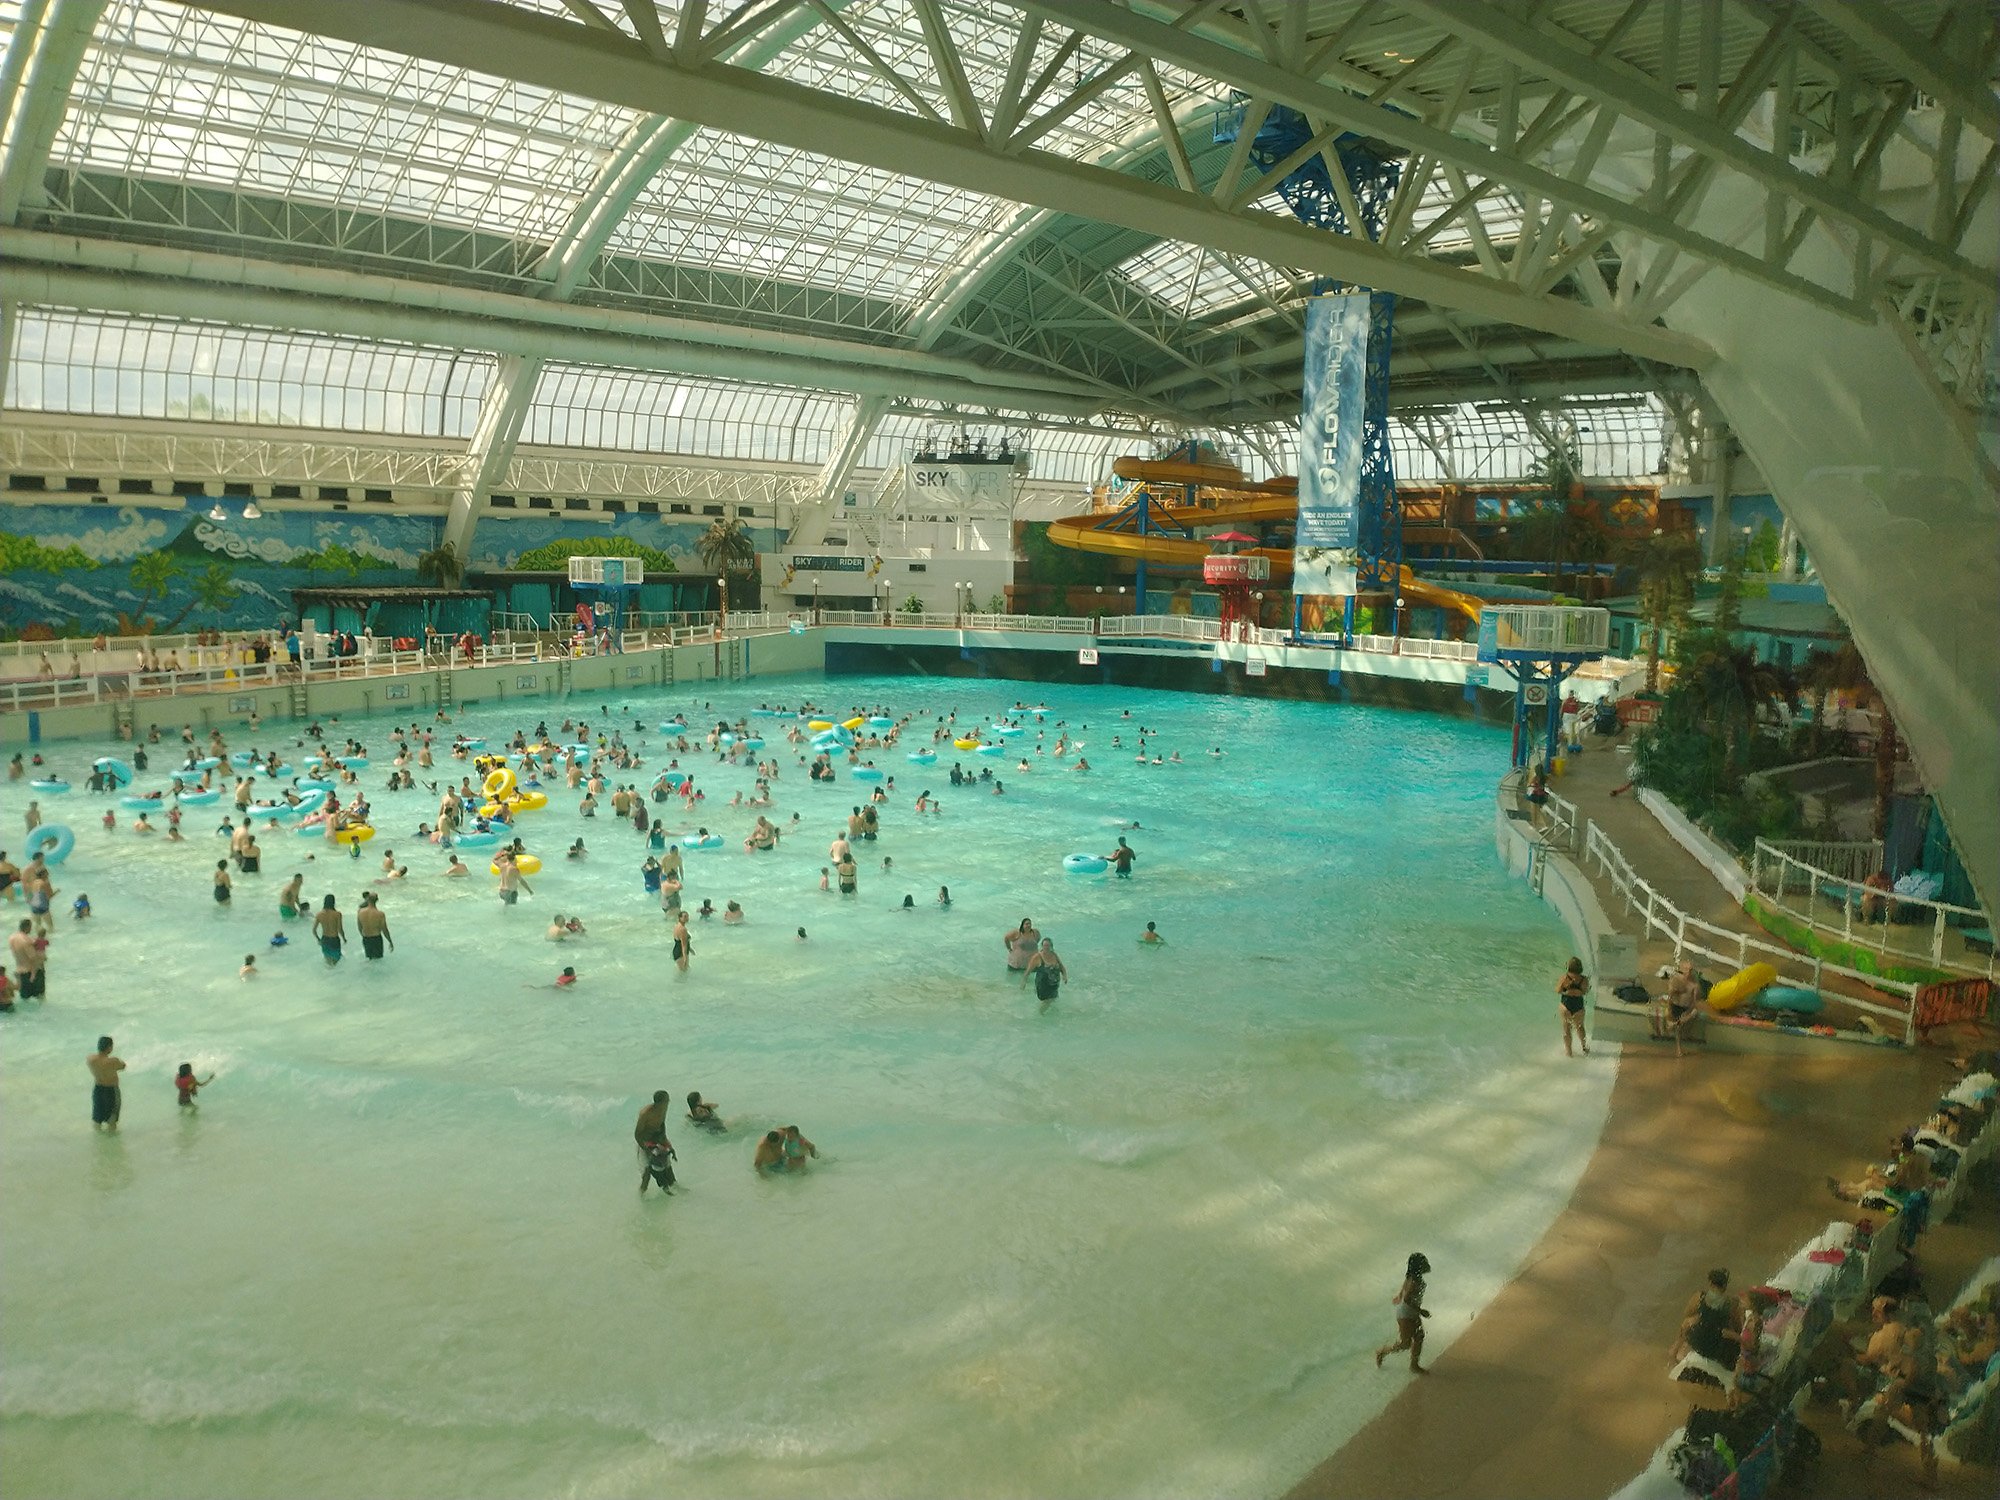 This is a huge wave pool. This place is badass.